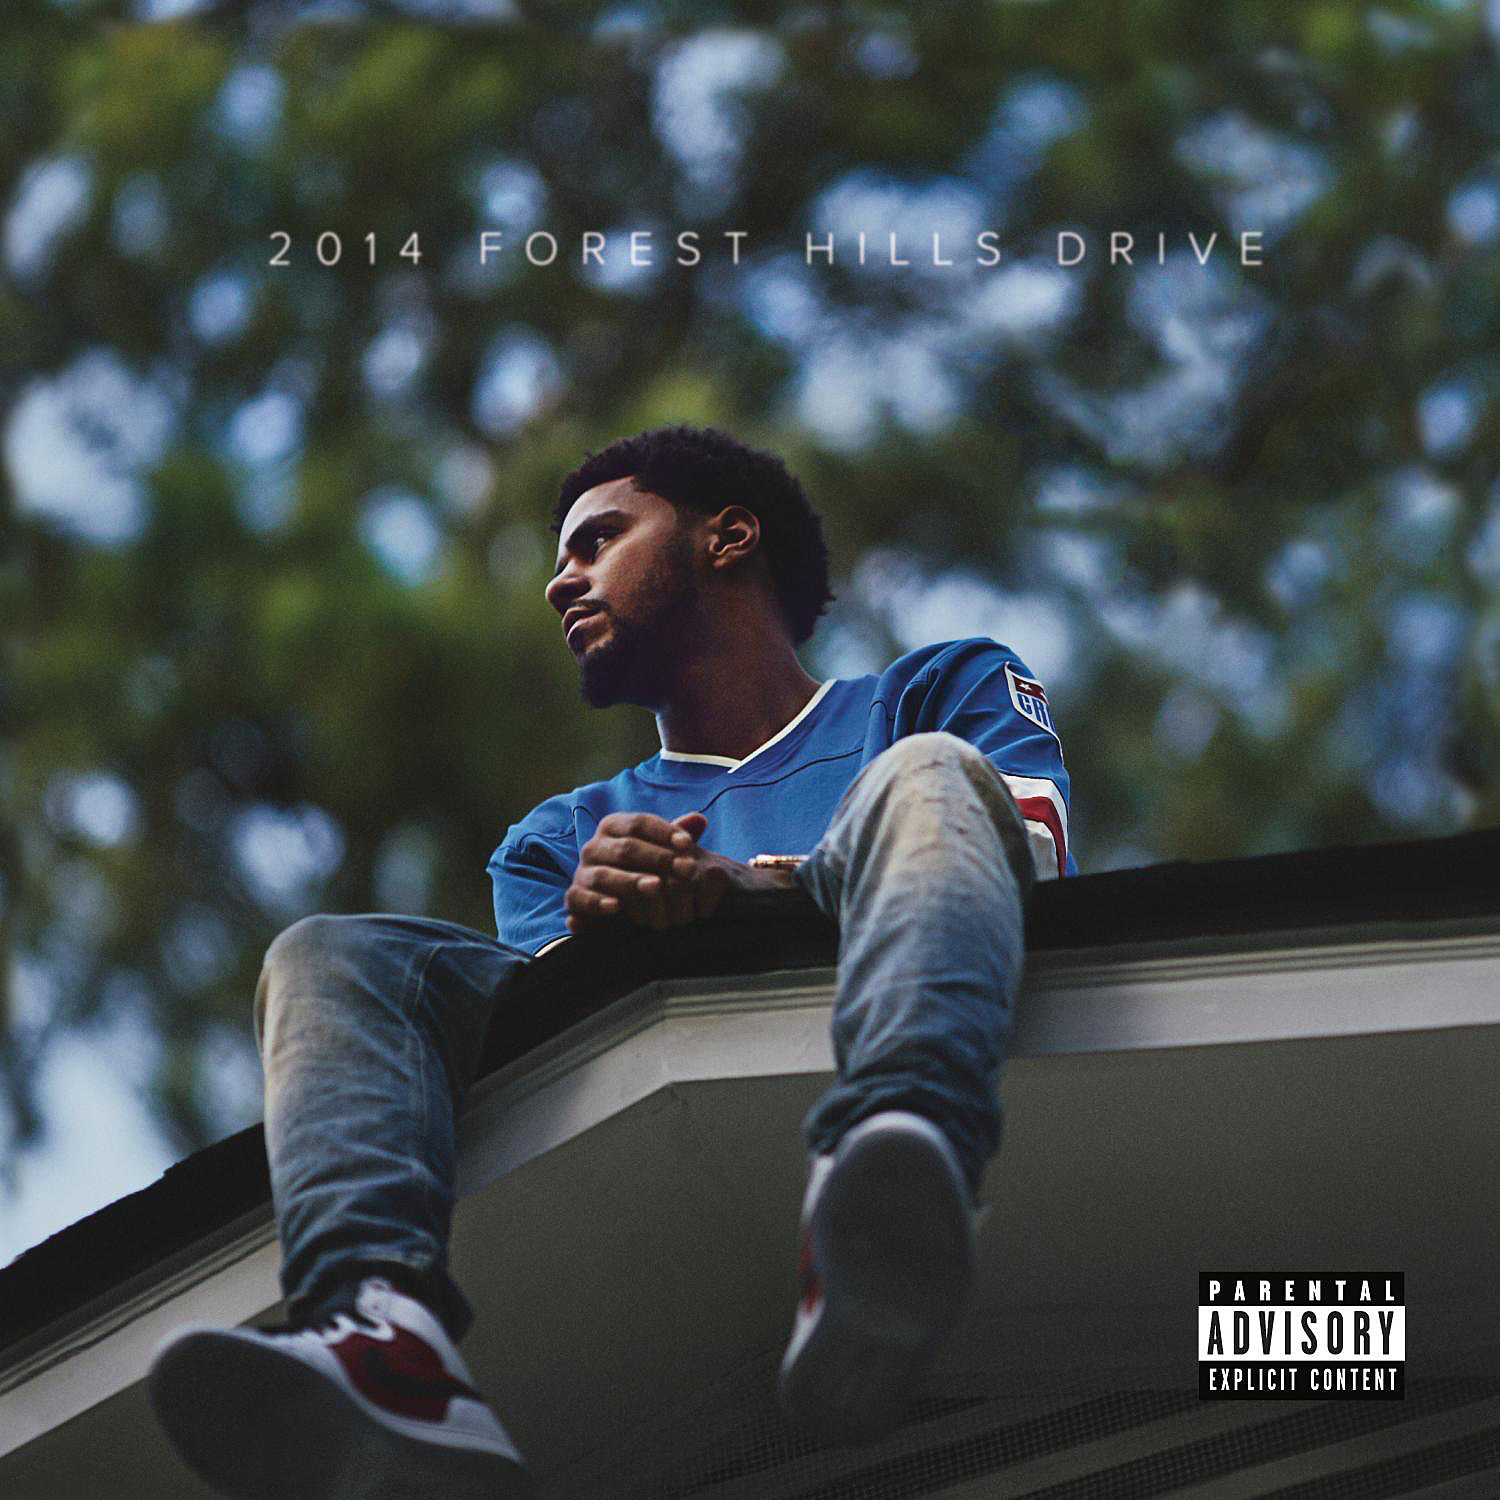 https://townsquare.media/site/812/files/2020/04/j-cole-2014-forest-hills-drive.jpg